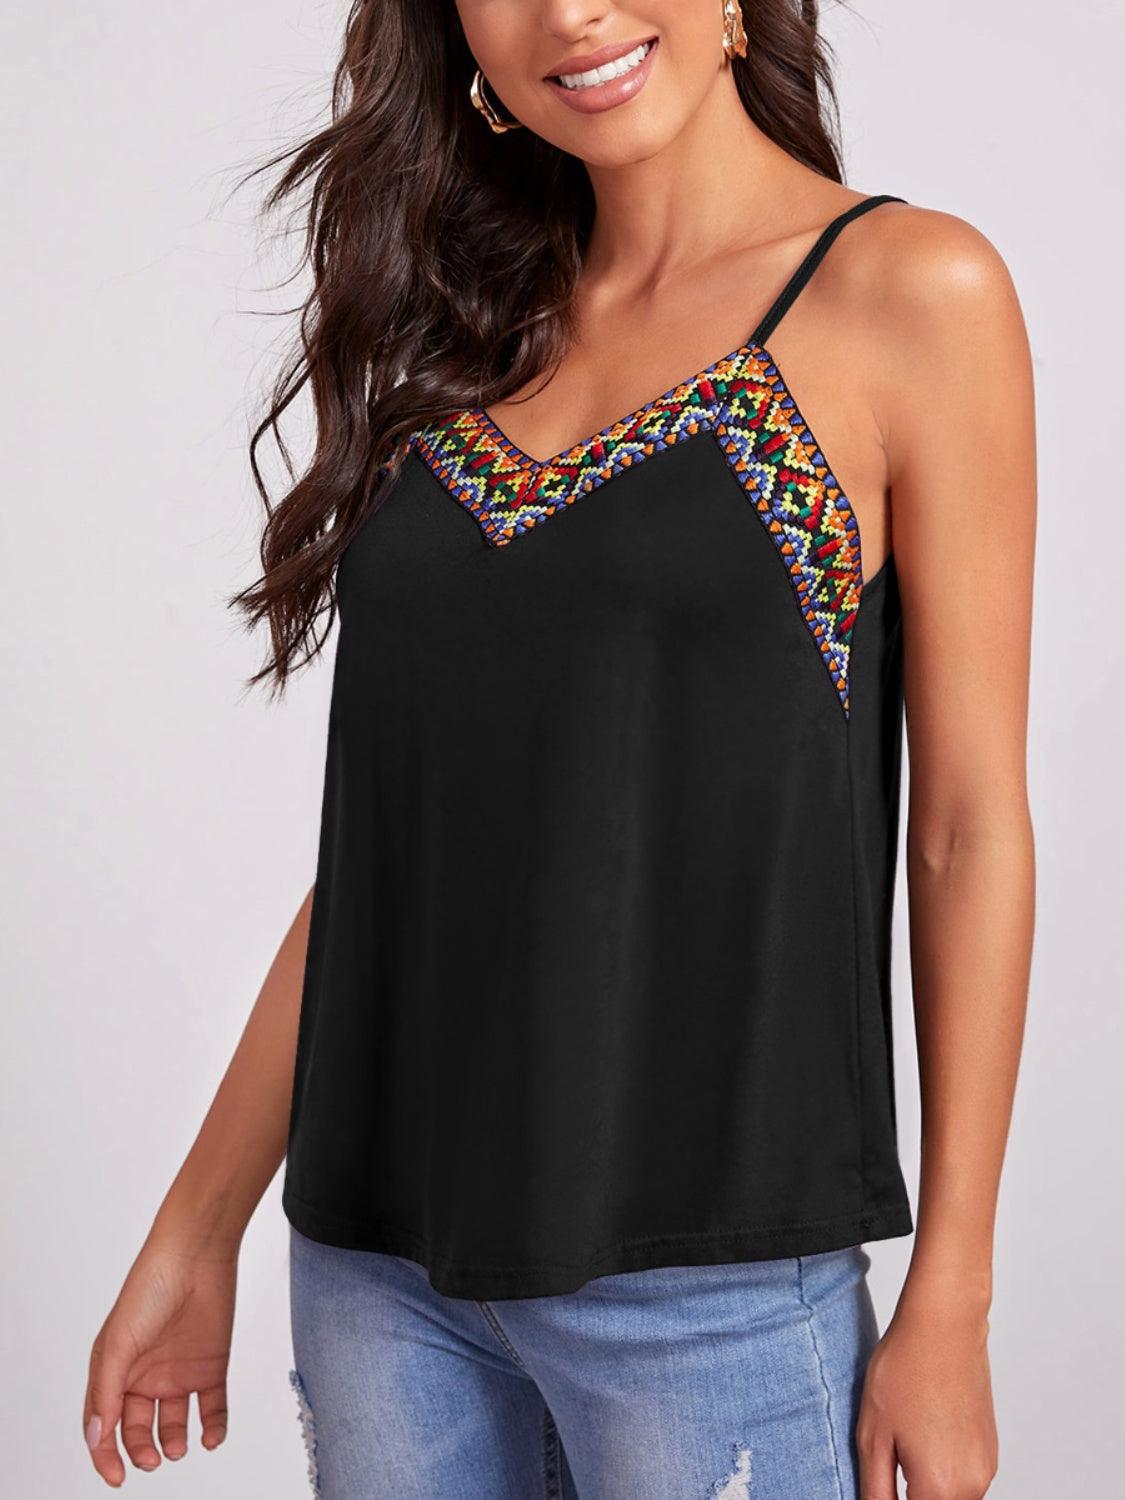 a woman wearing a black top with a colorful design